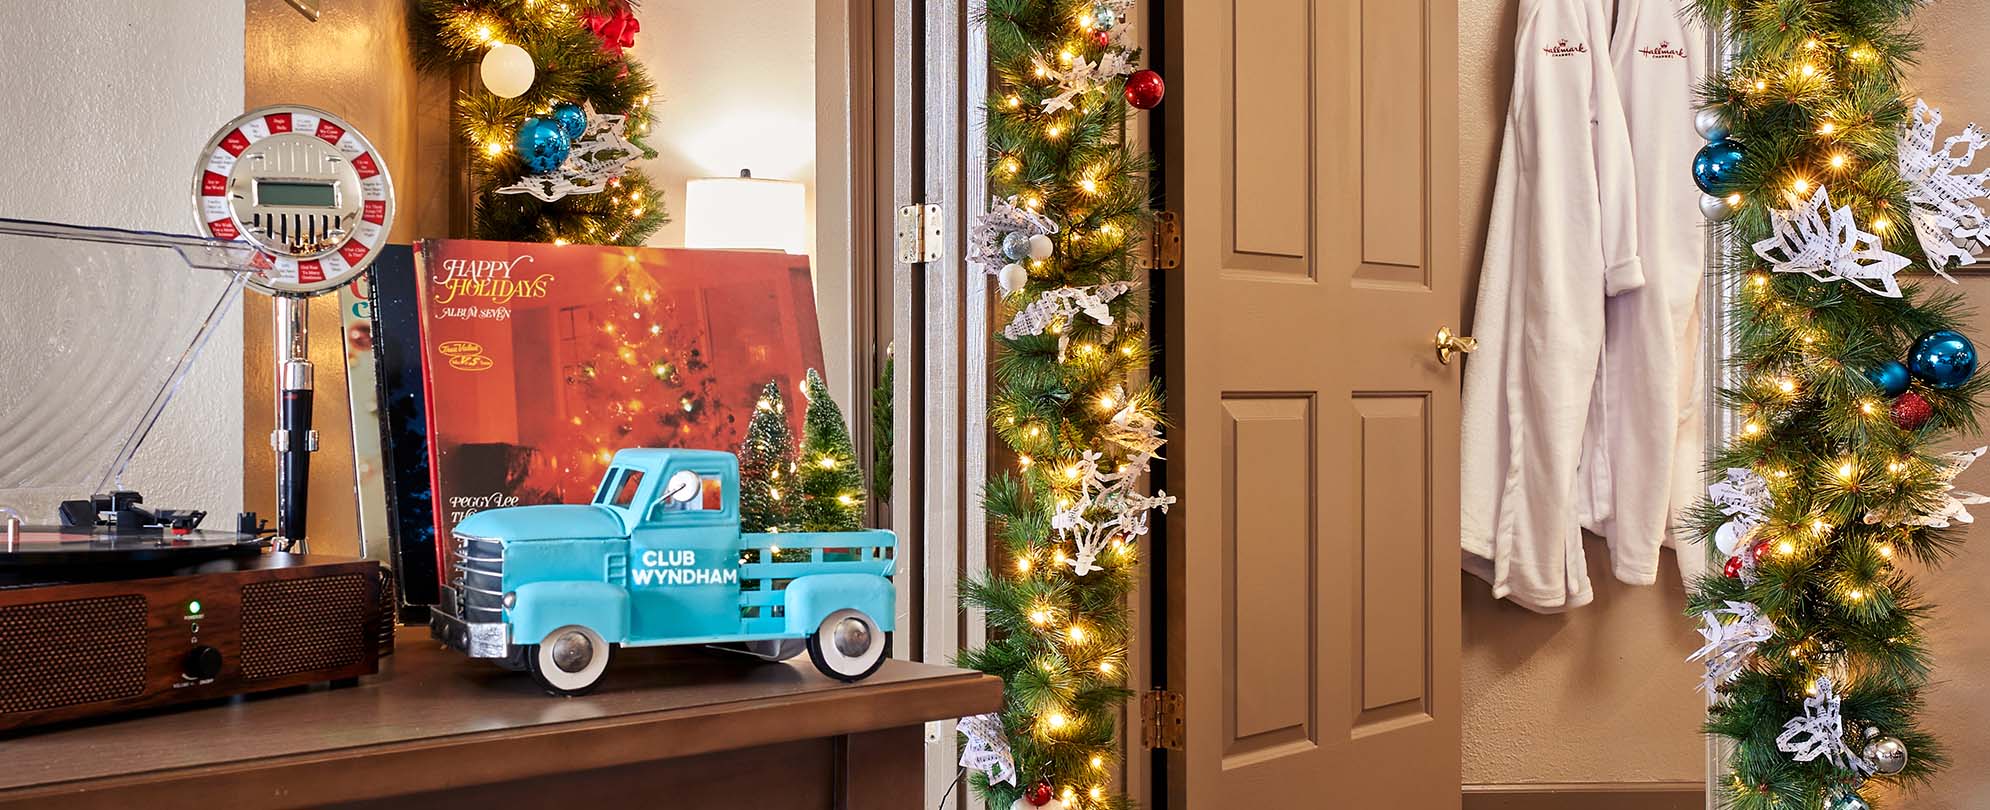 A record player, a Christmas record, and a charming blue toy truck with Christmas trees in the bed of the truck.